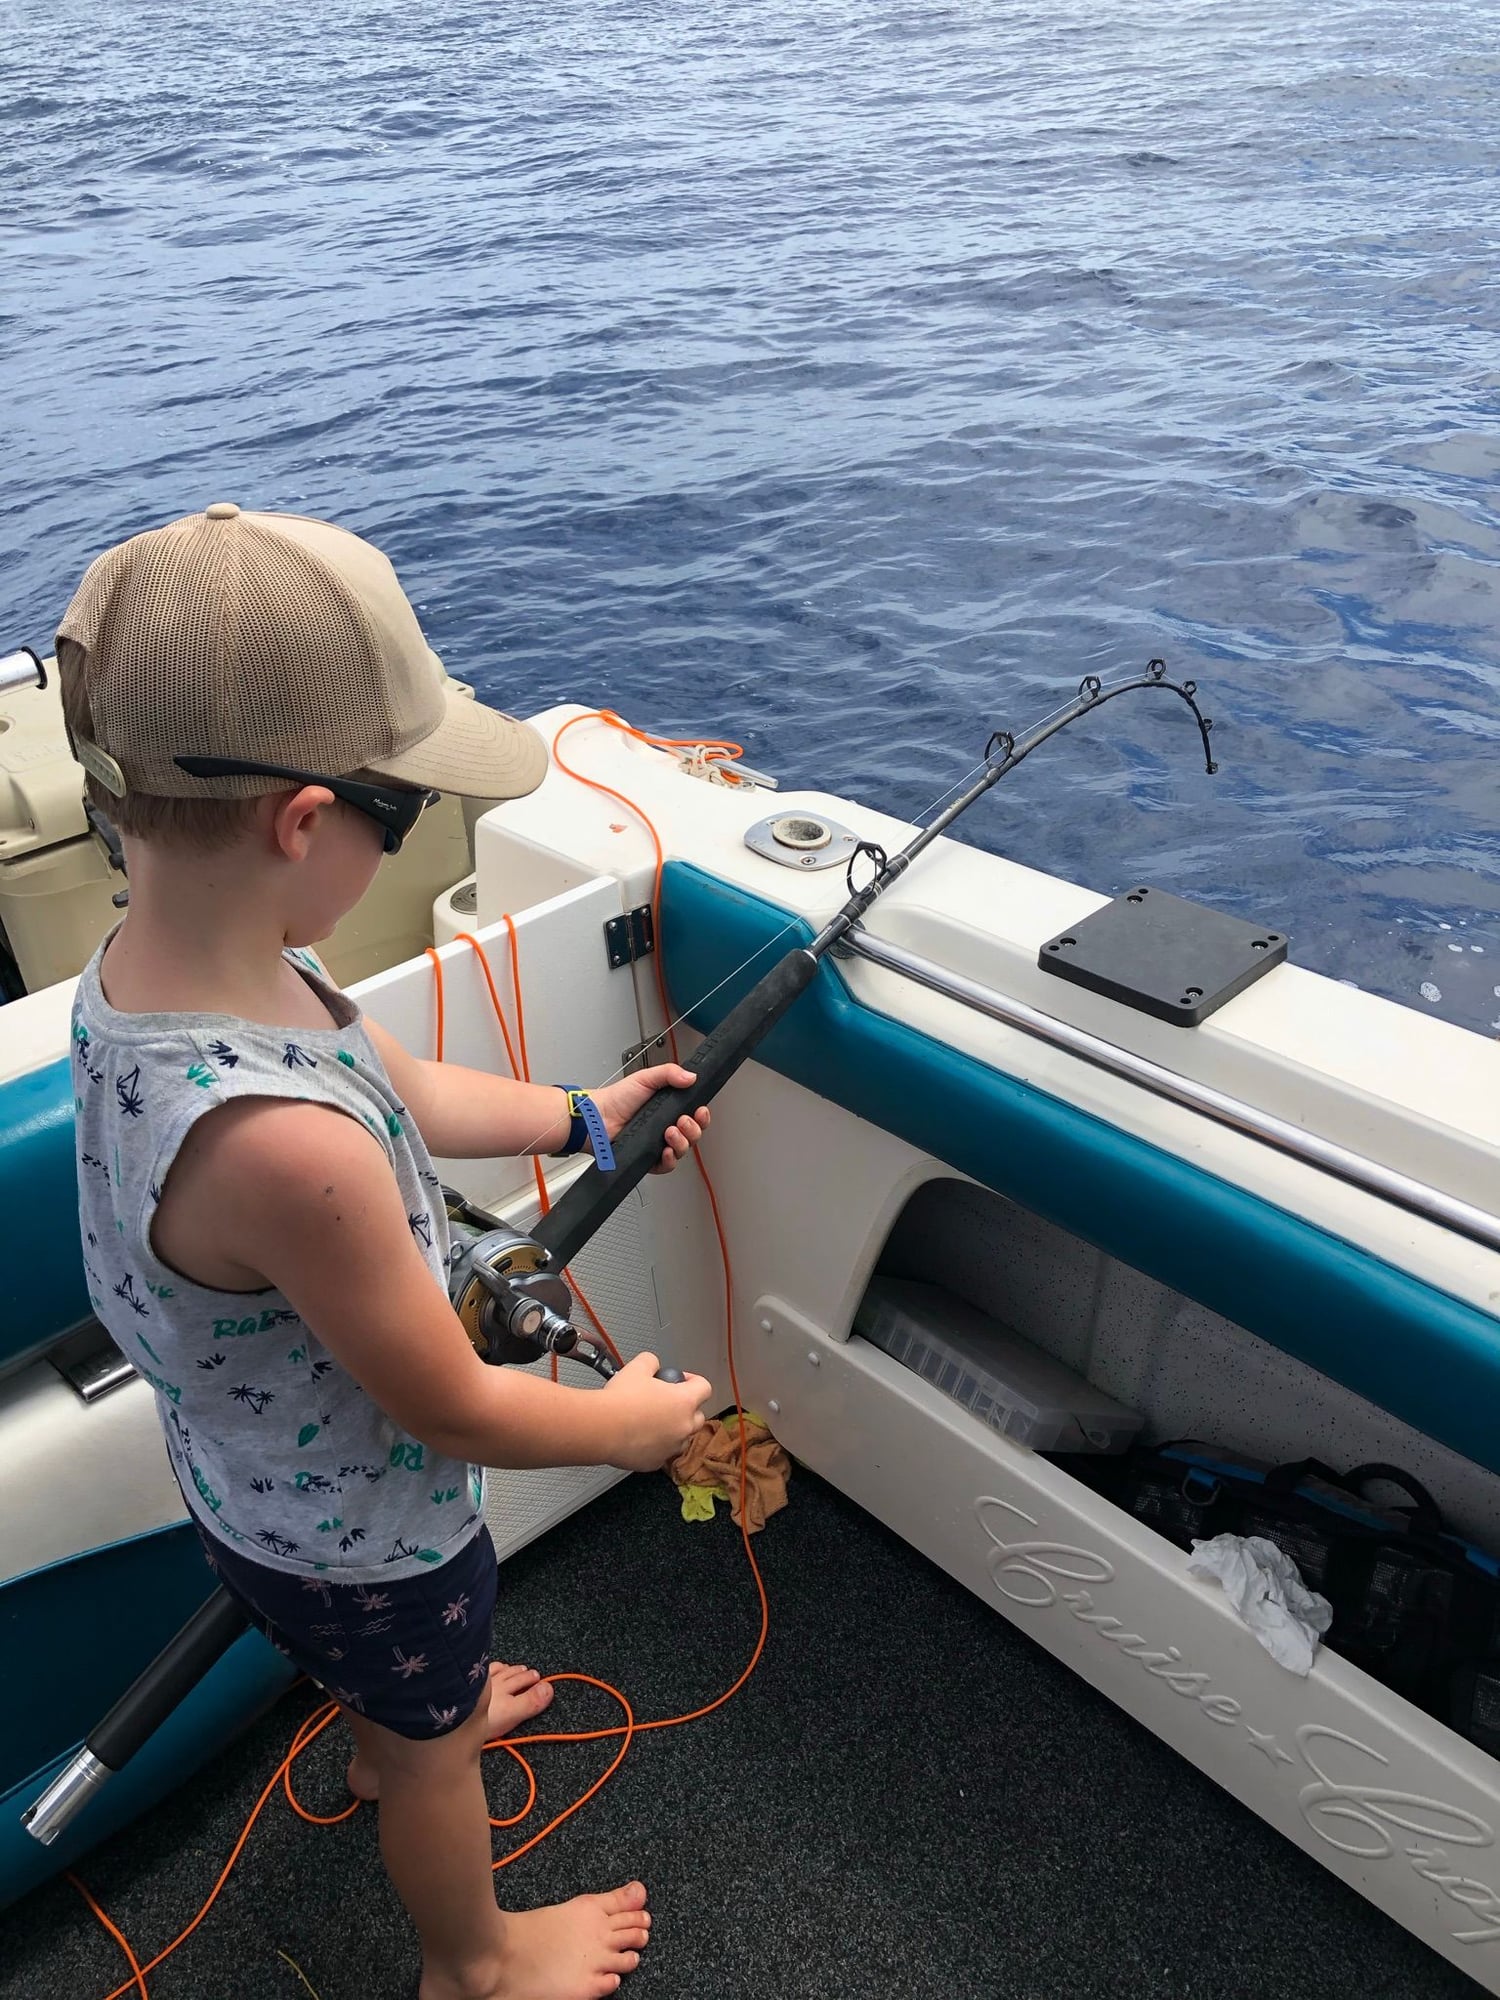 Best offshore/nearshore rod for small child - The Hull Truth - Boating and  Fishing Forum